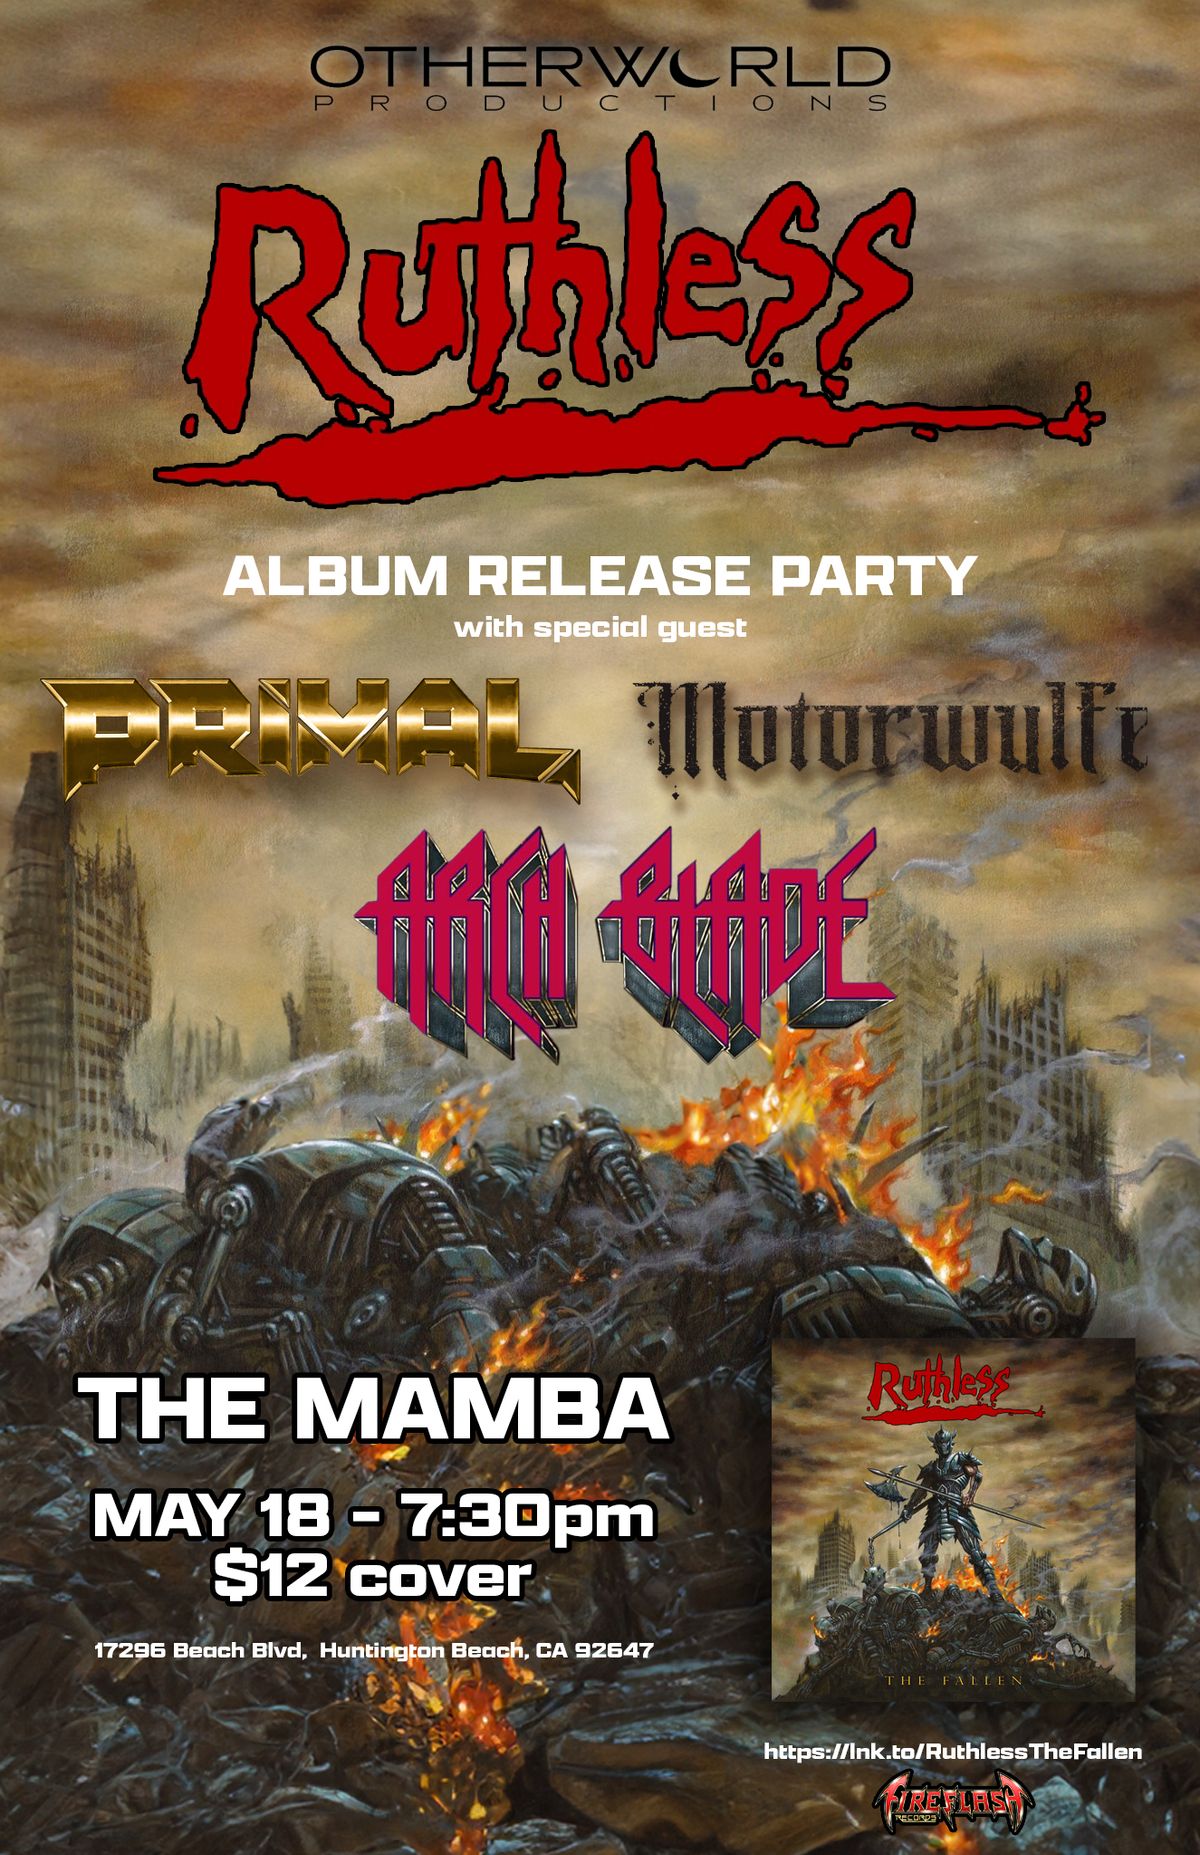 Ruthless CD release party for "The Fallen" with Motorwulfe\/ Primal\/ Arch Blade